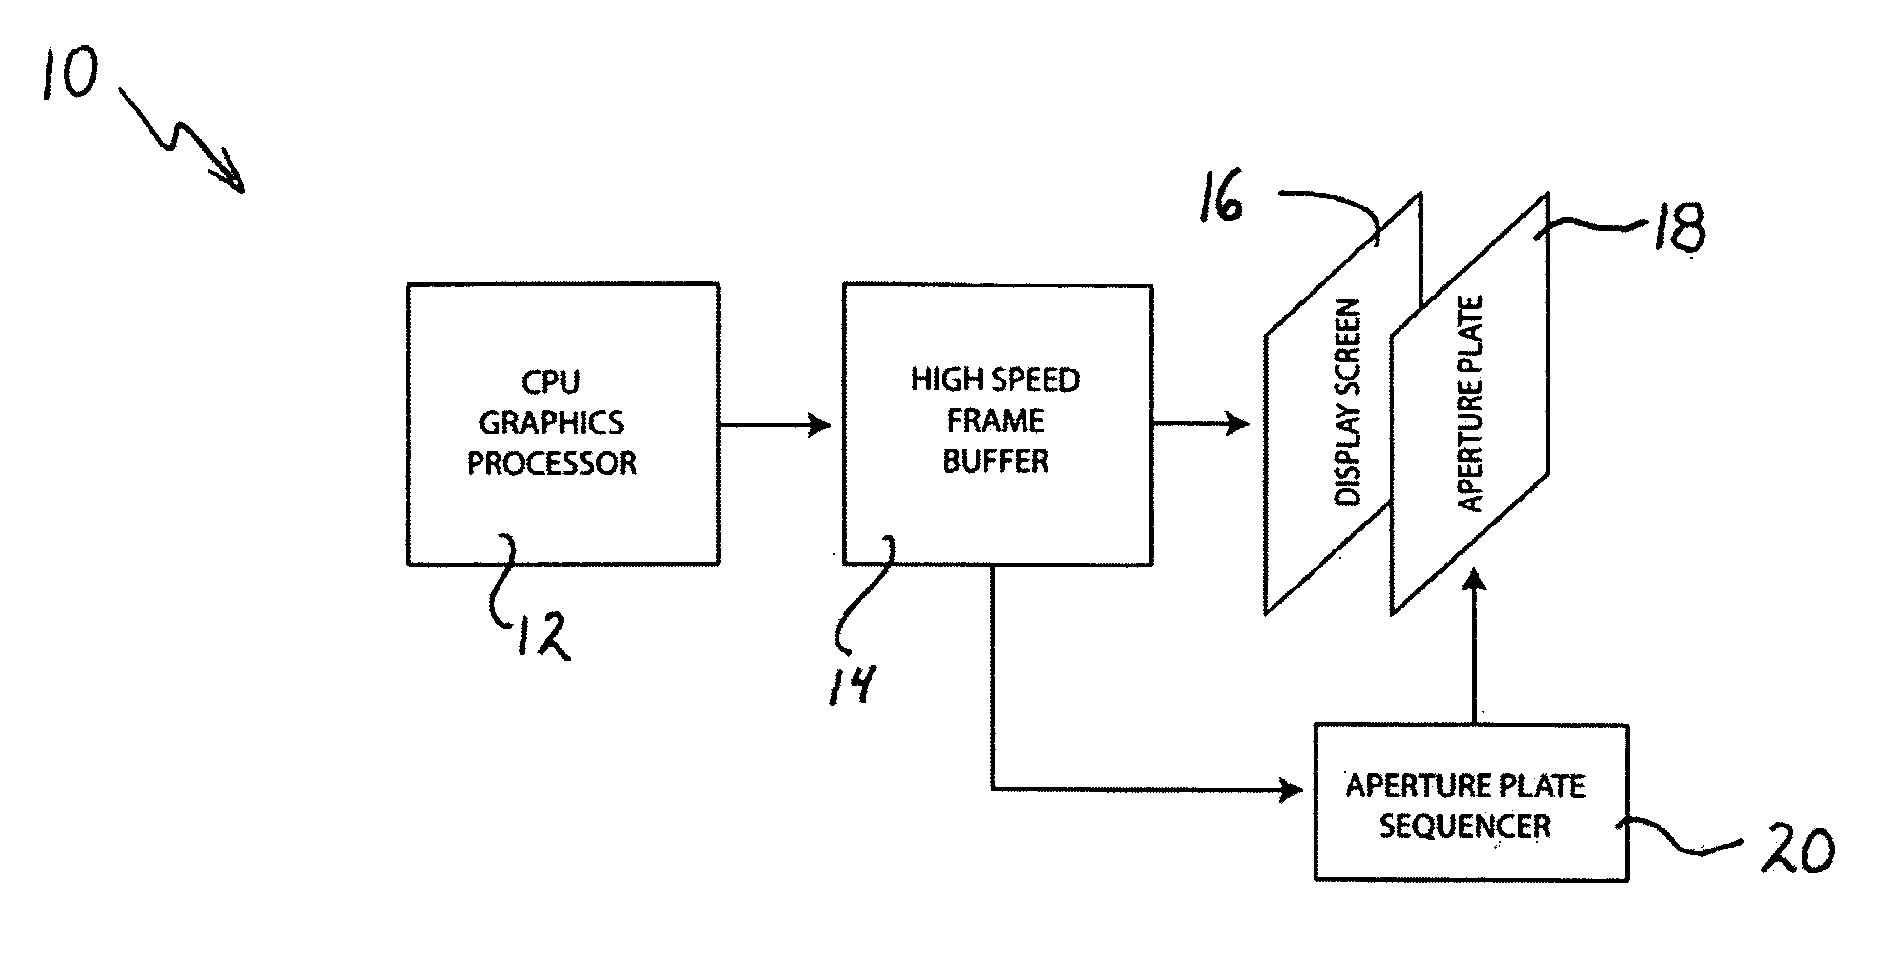 Method for formating images for angle-specific viewing in a scanning aperture display device